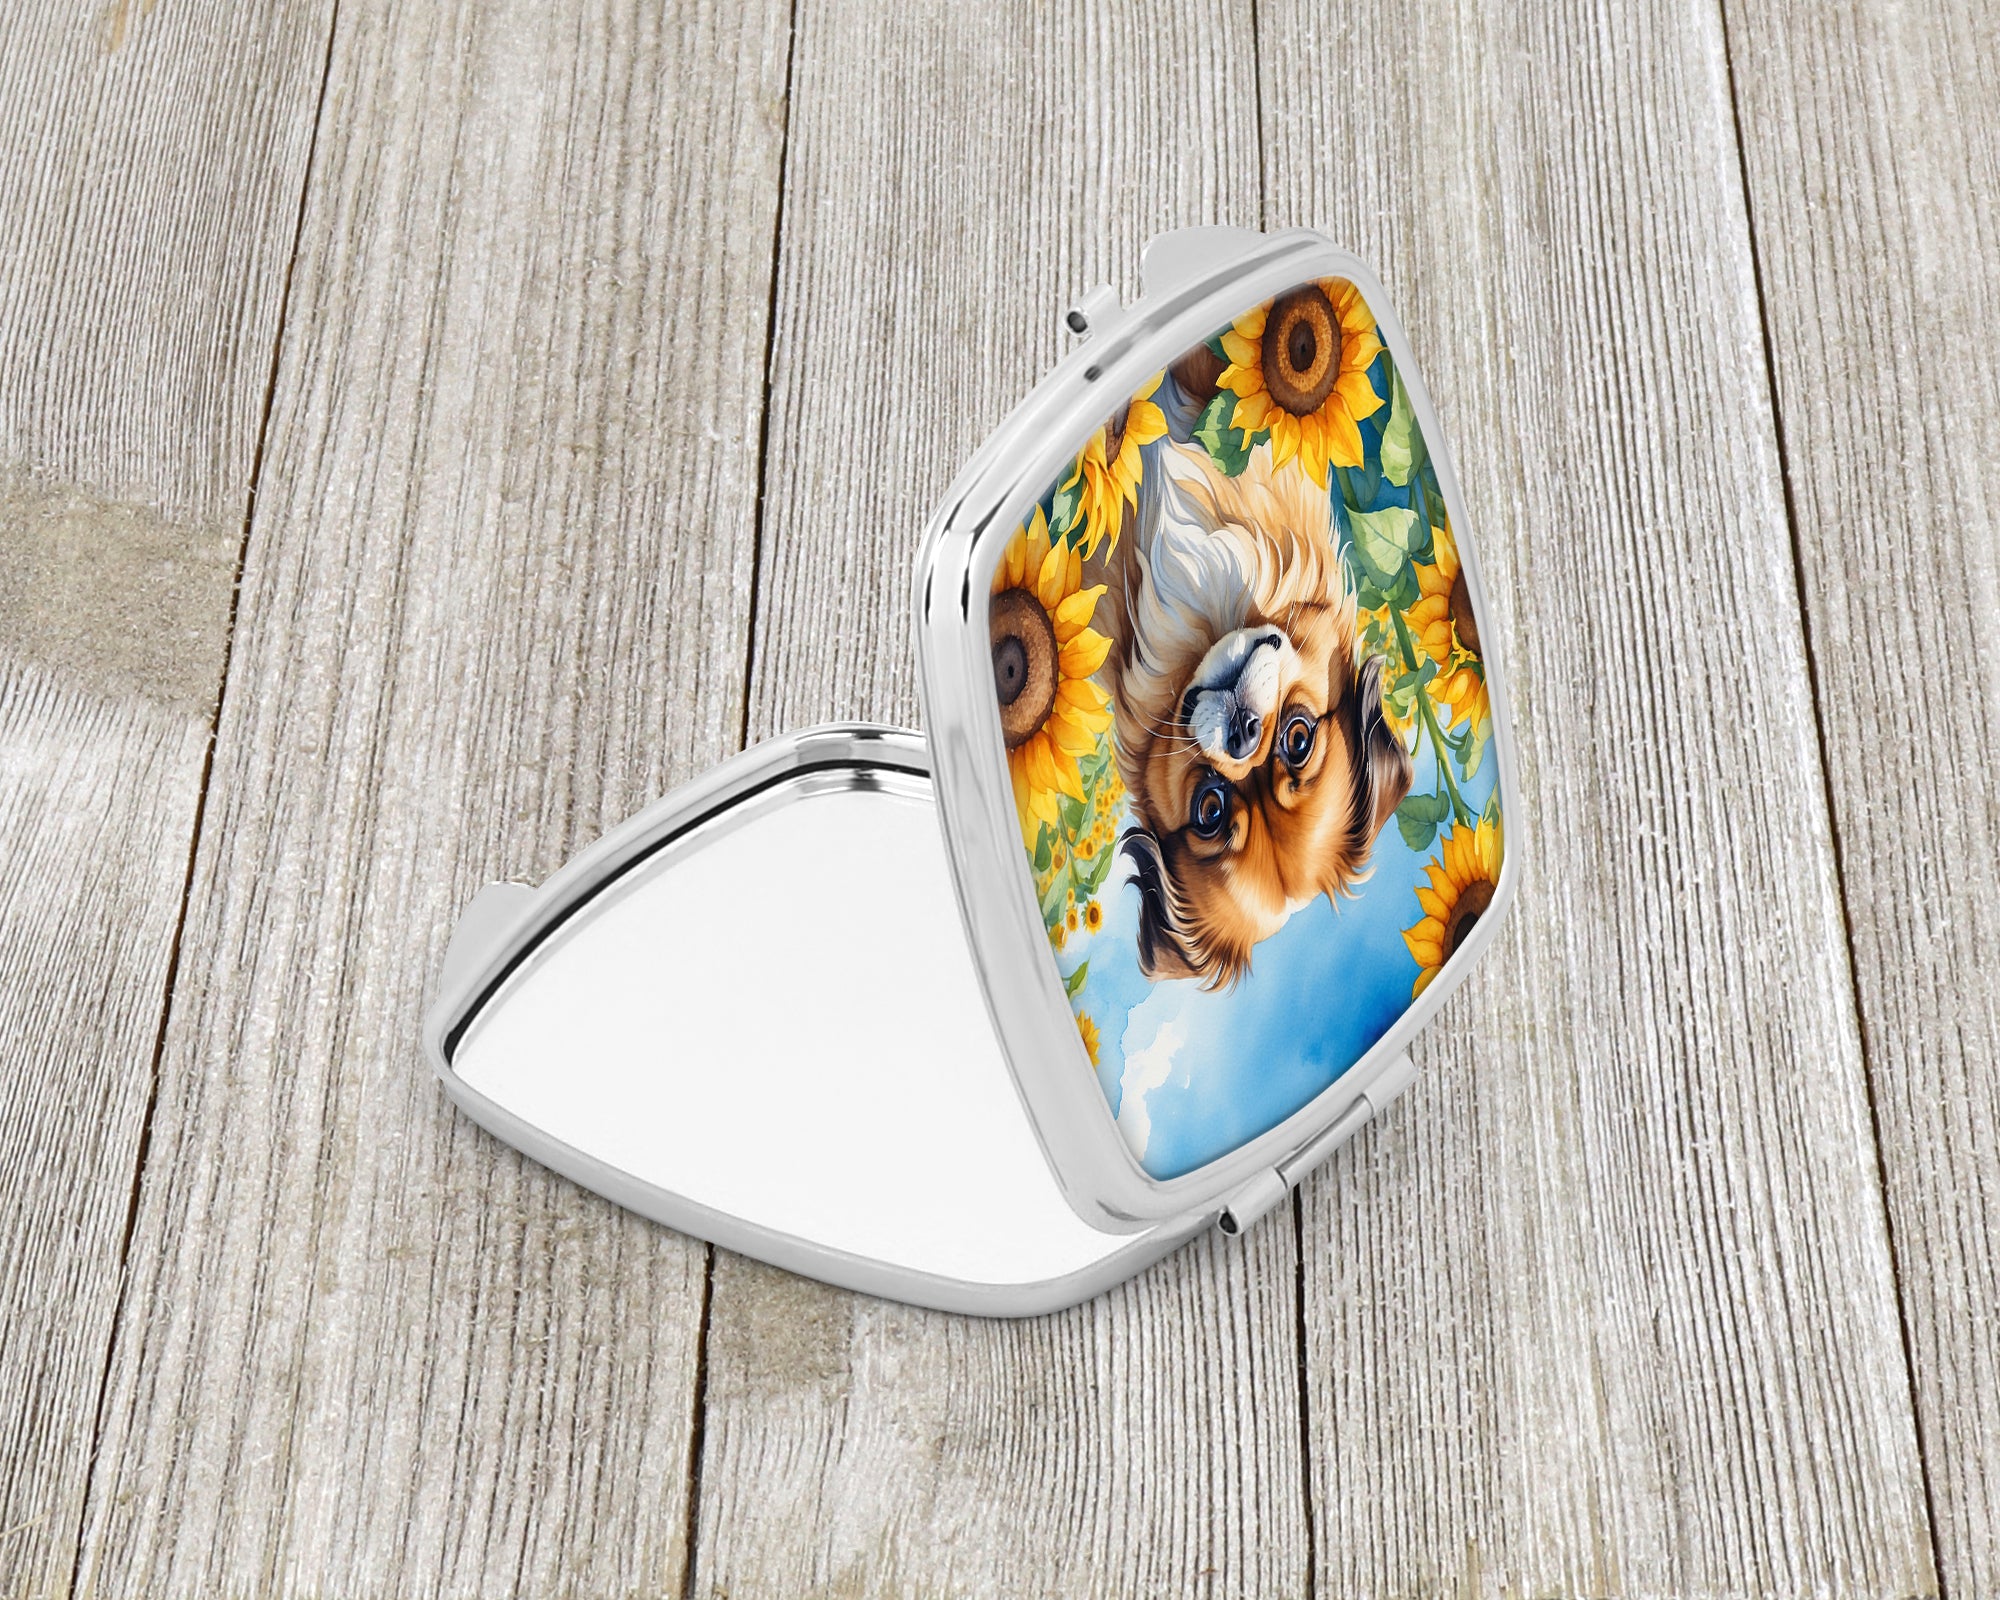 Buy this Tibetan Spaniel in Sunflowers Compact Mirror